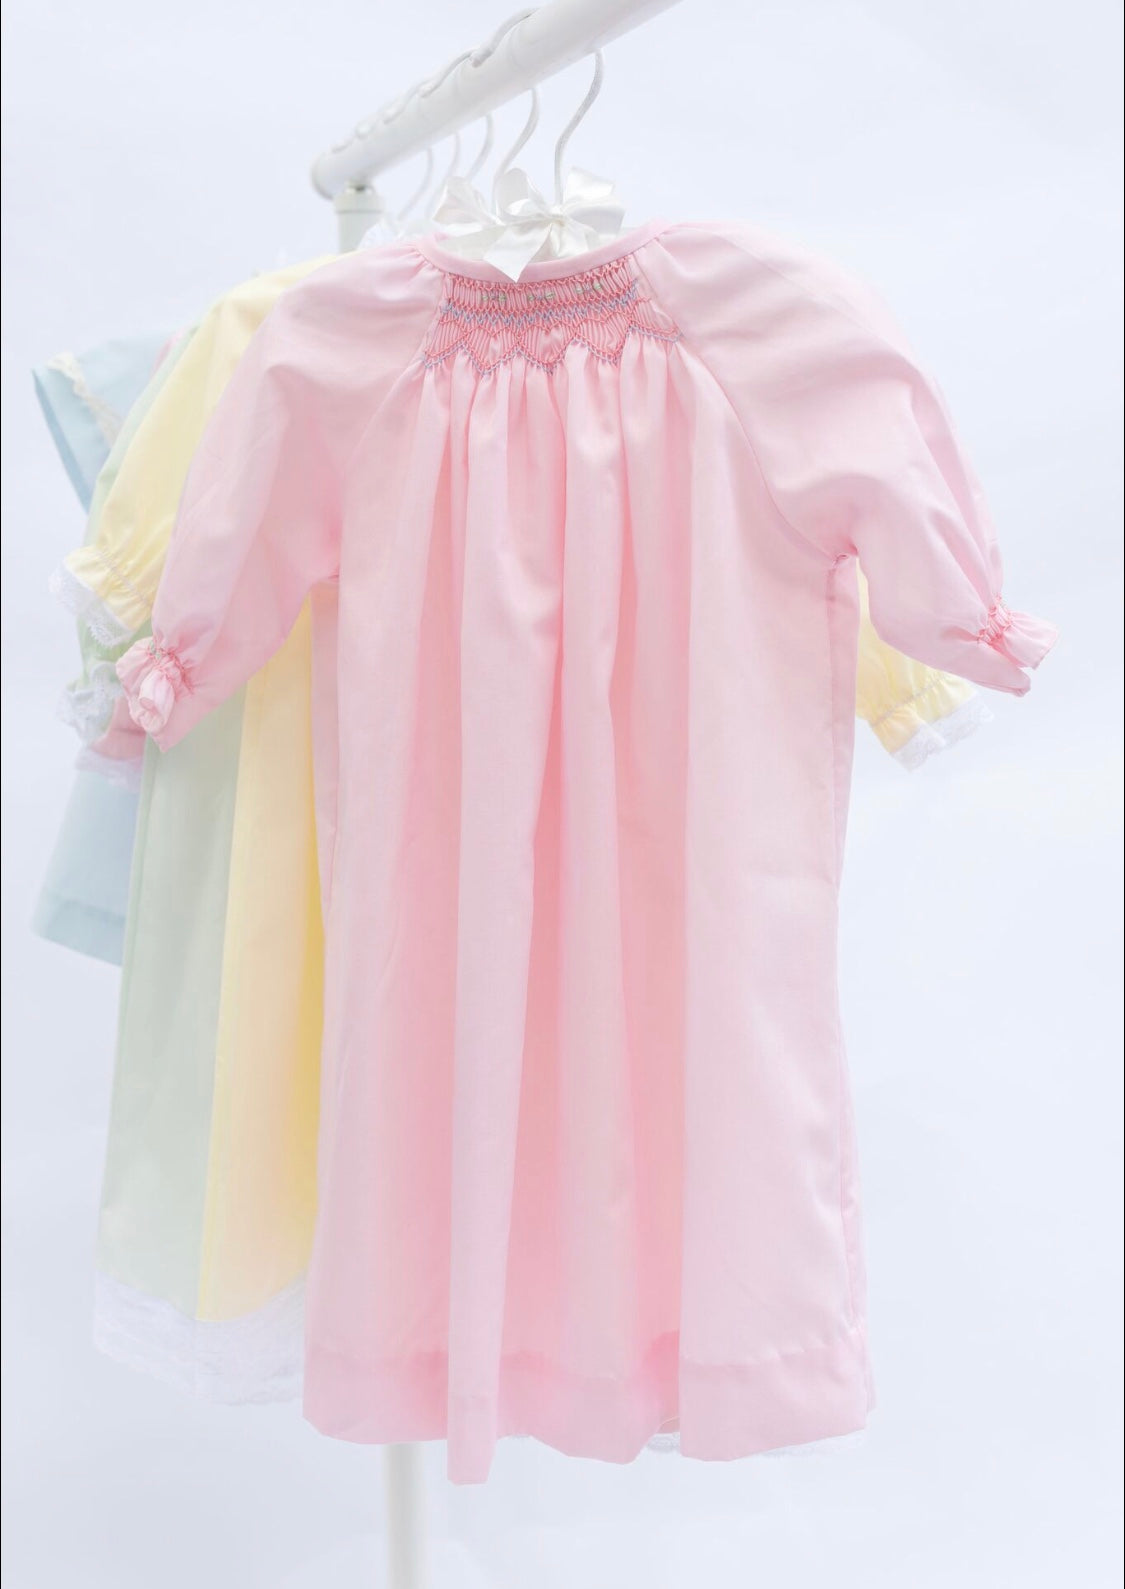 Do Say Give Girls Hand Smocked Heart Daygown